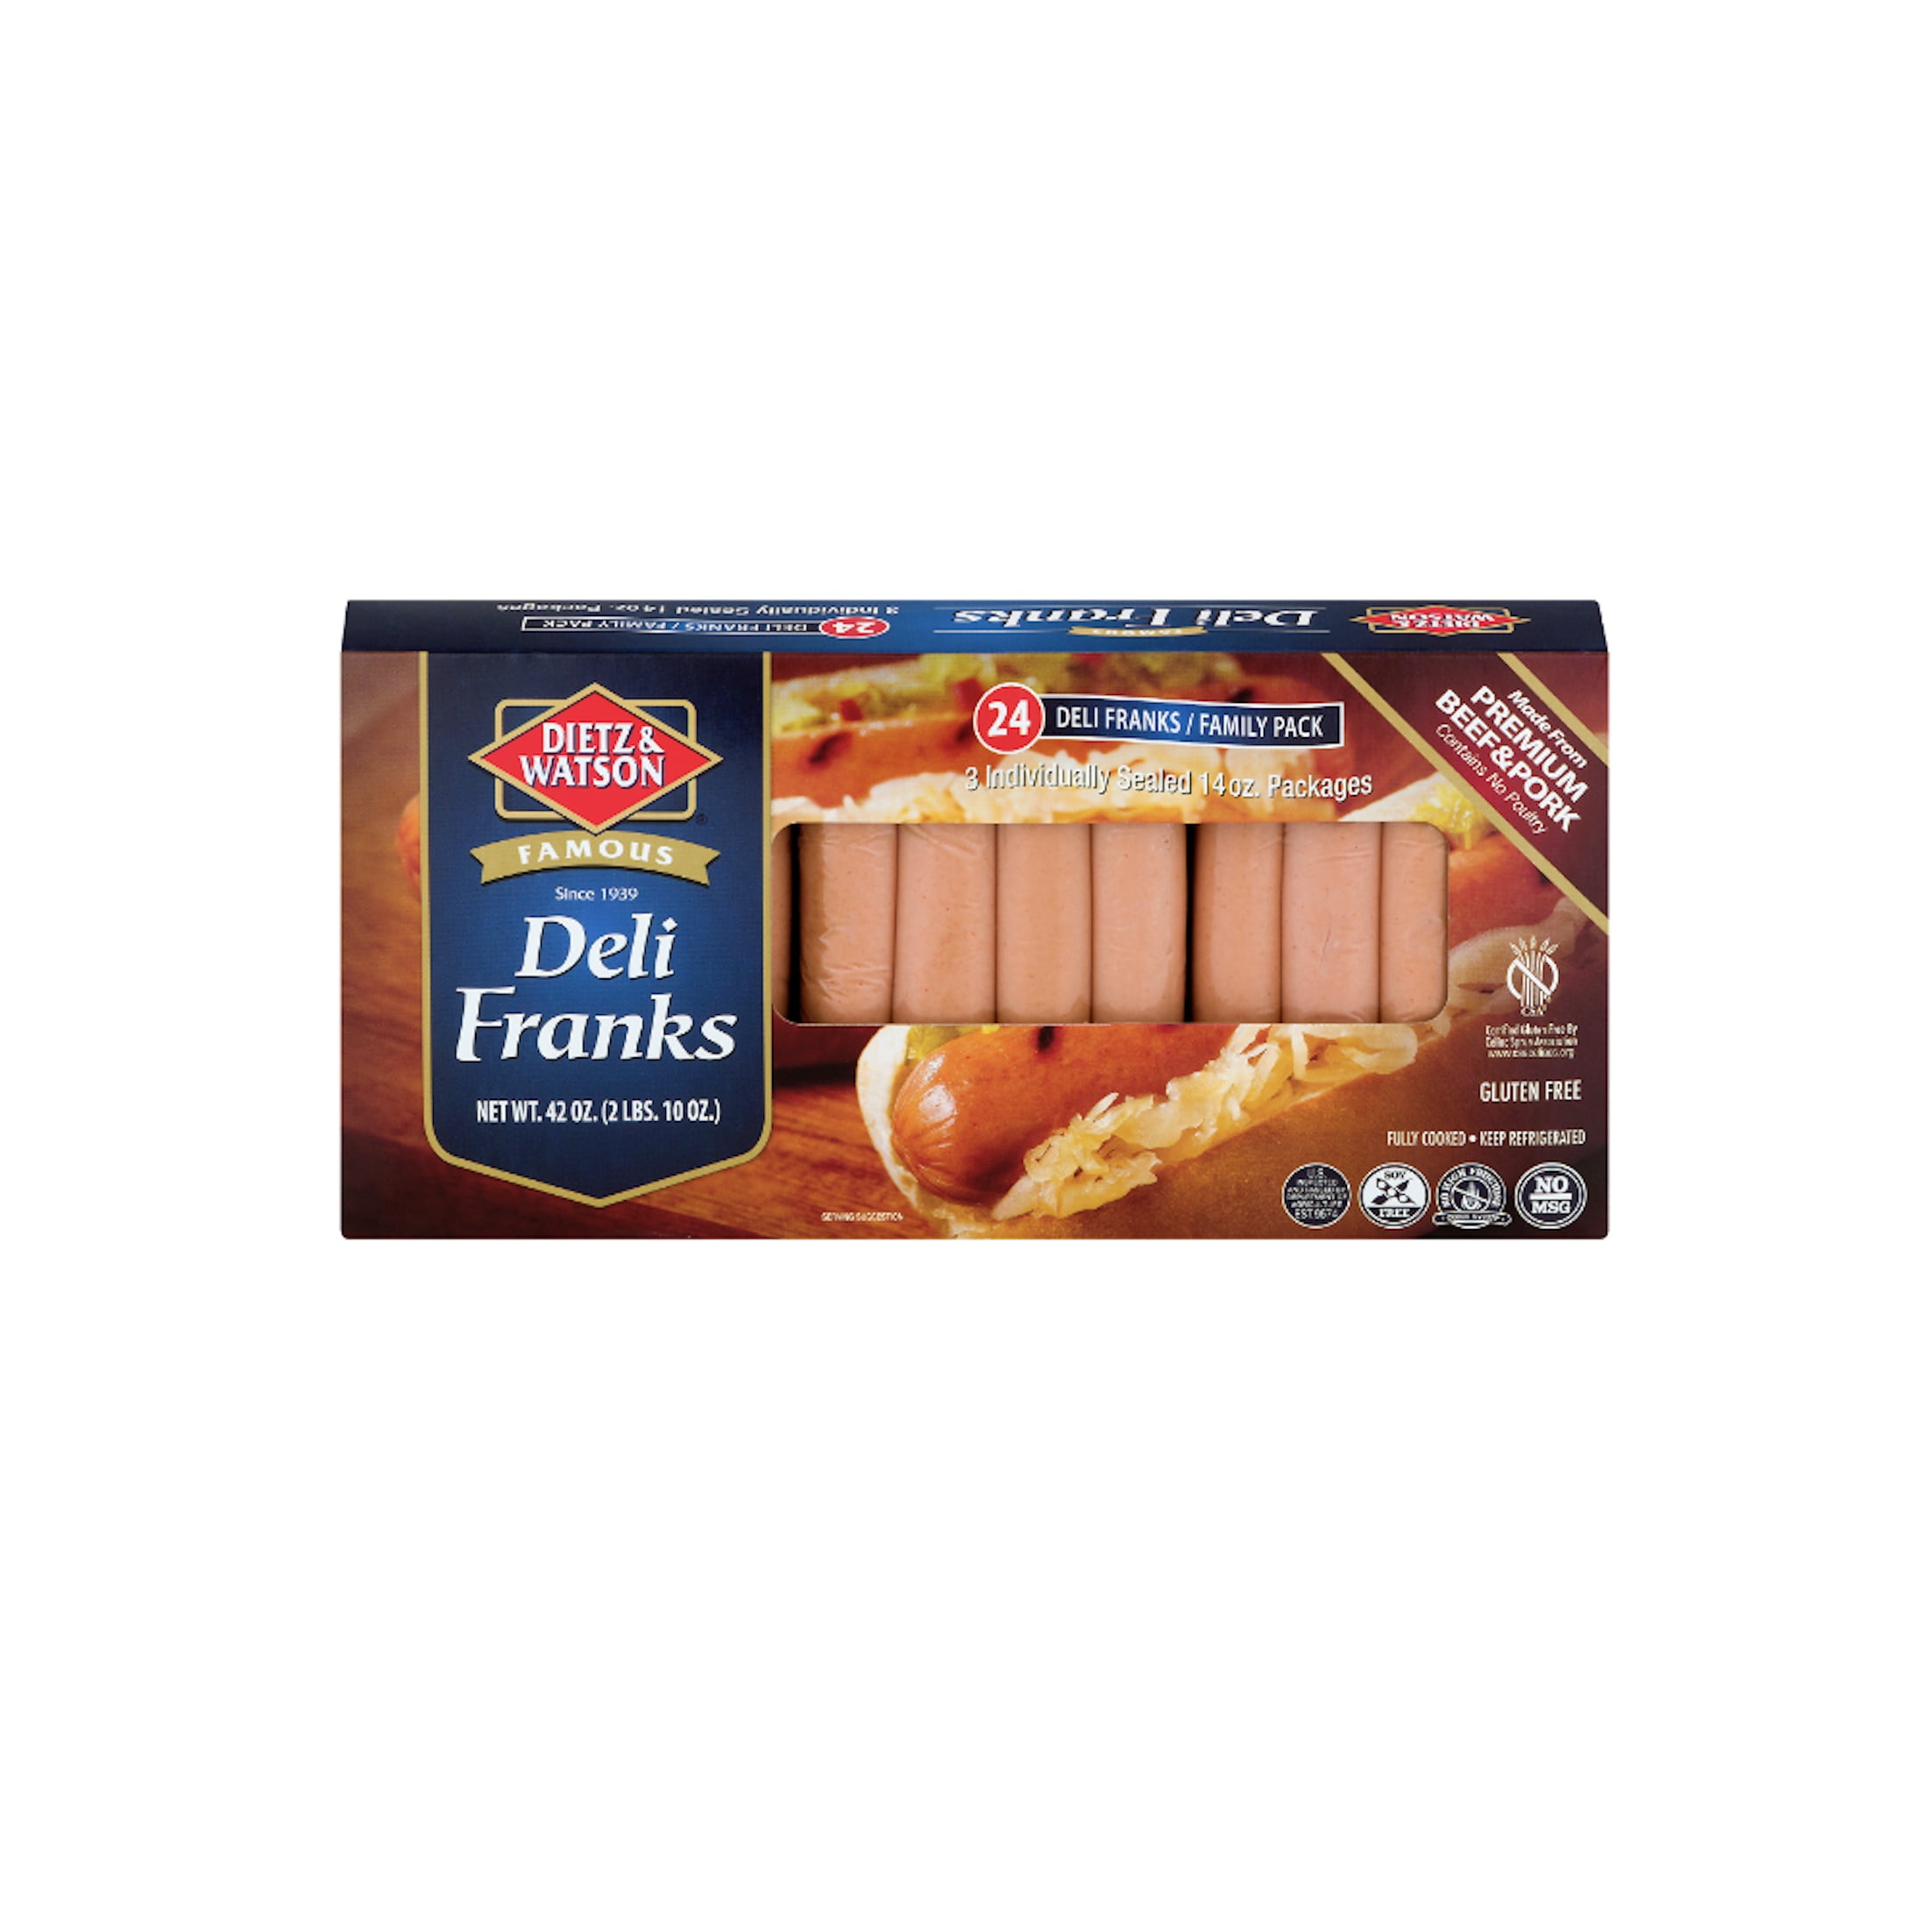 Dietz & Watson Deli Hot Dog Franks, 42 oz, (Fully Cooked)